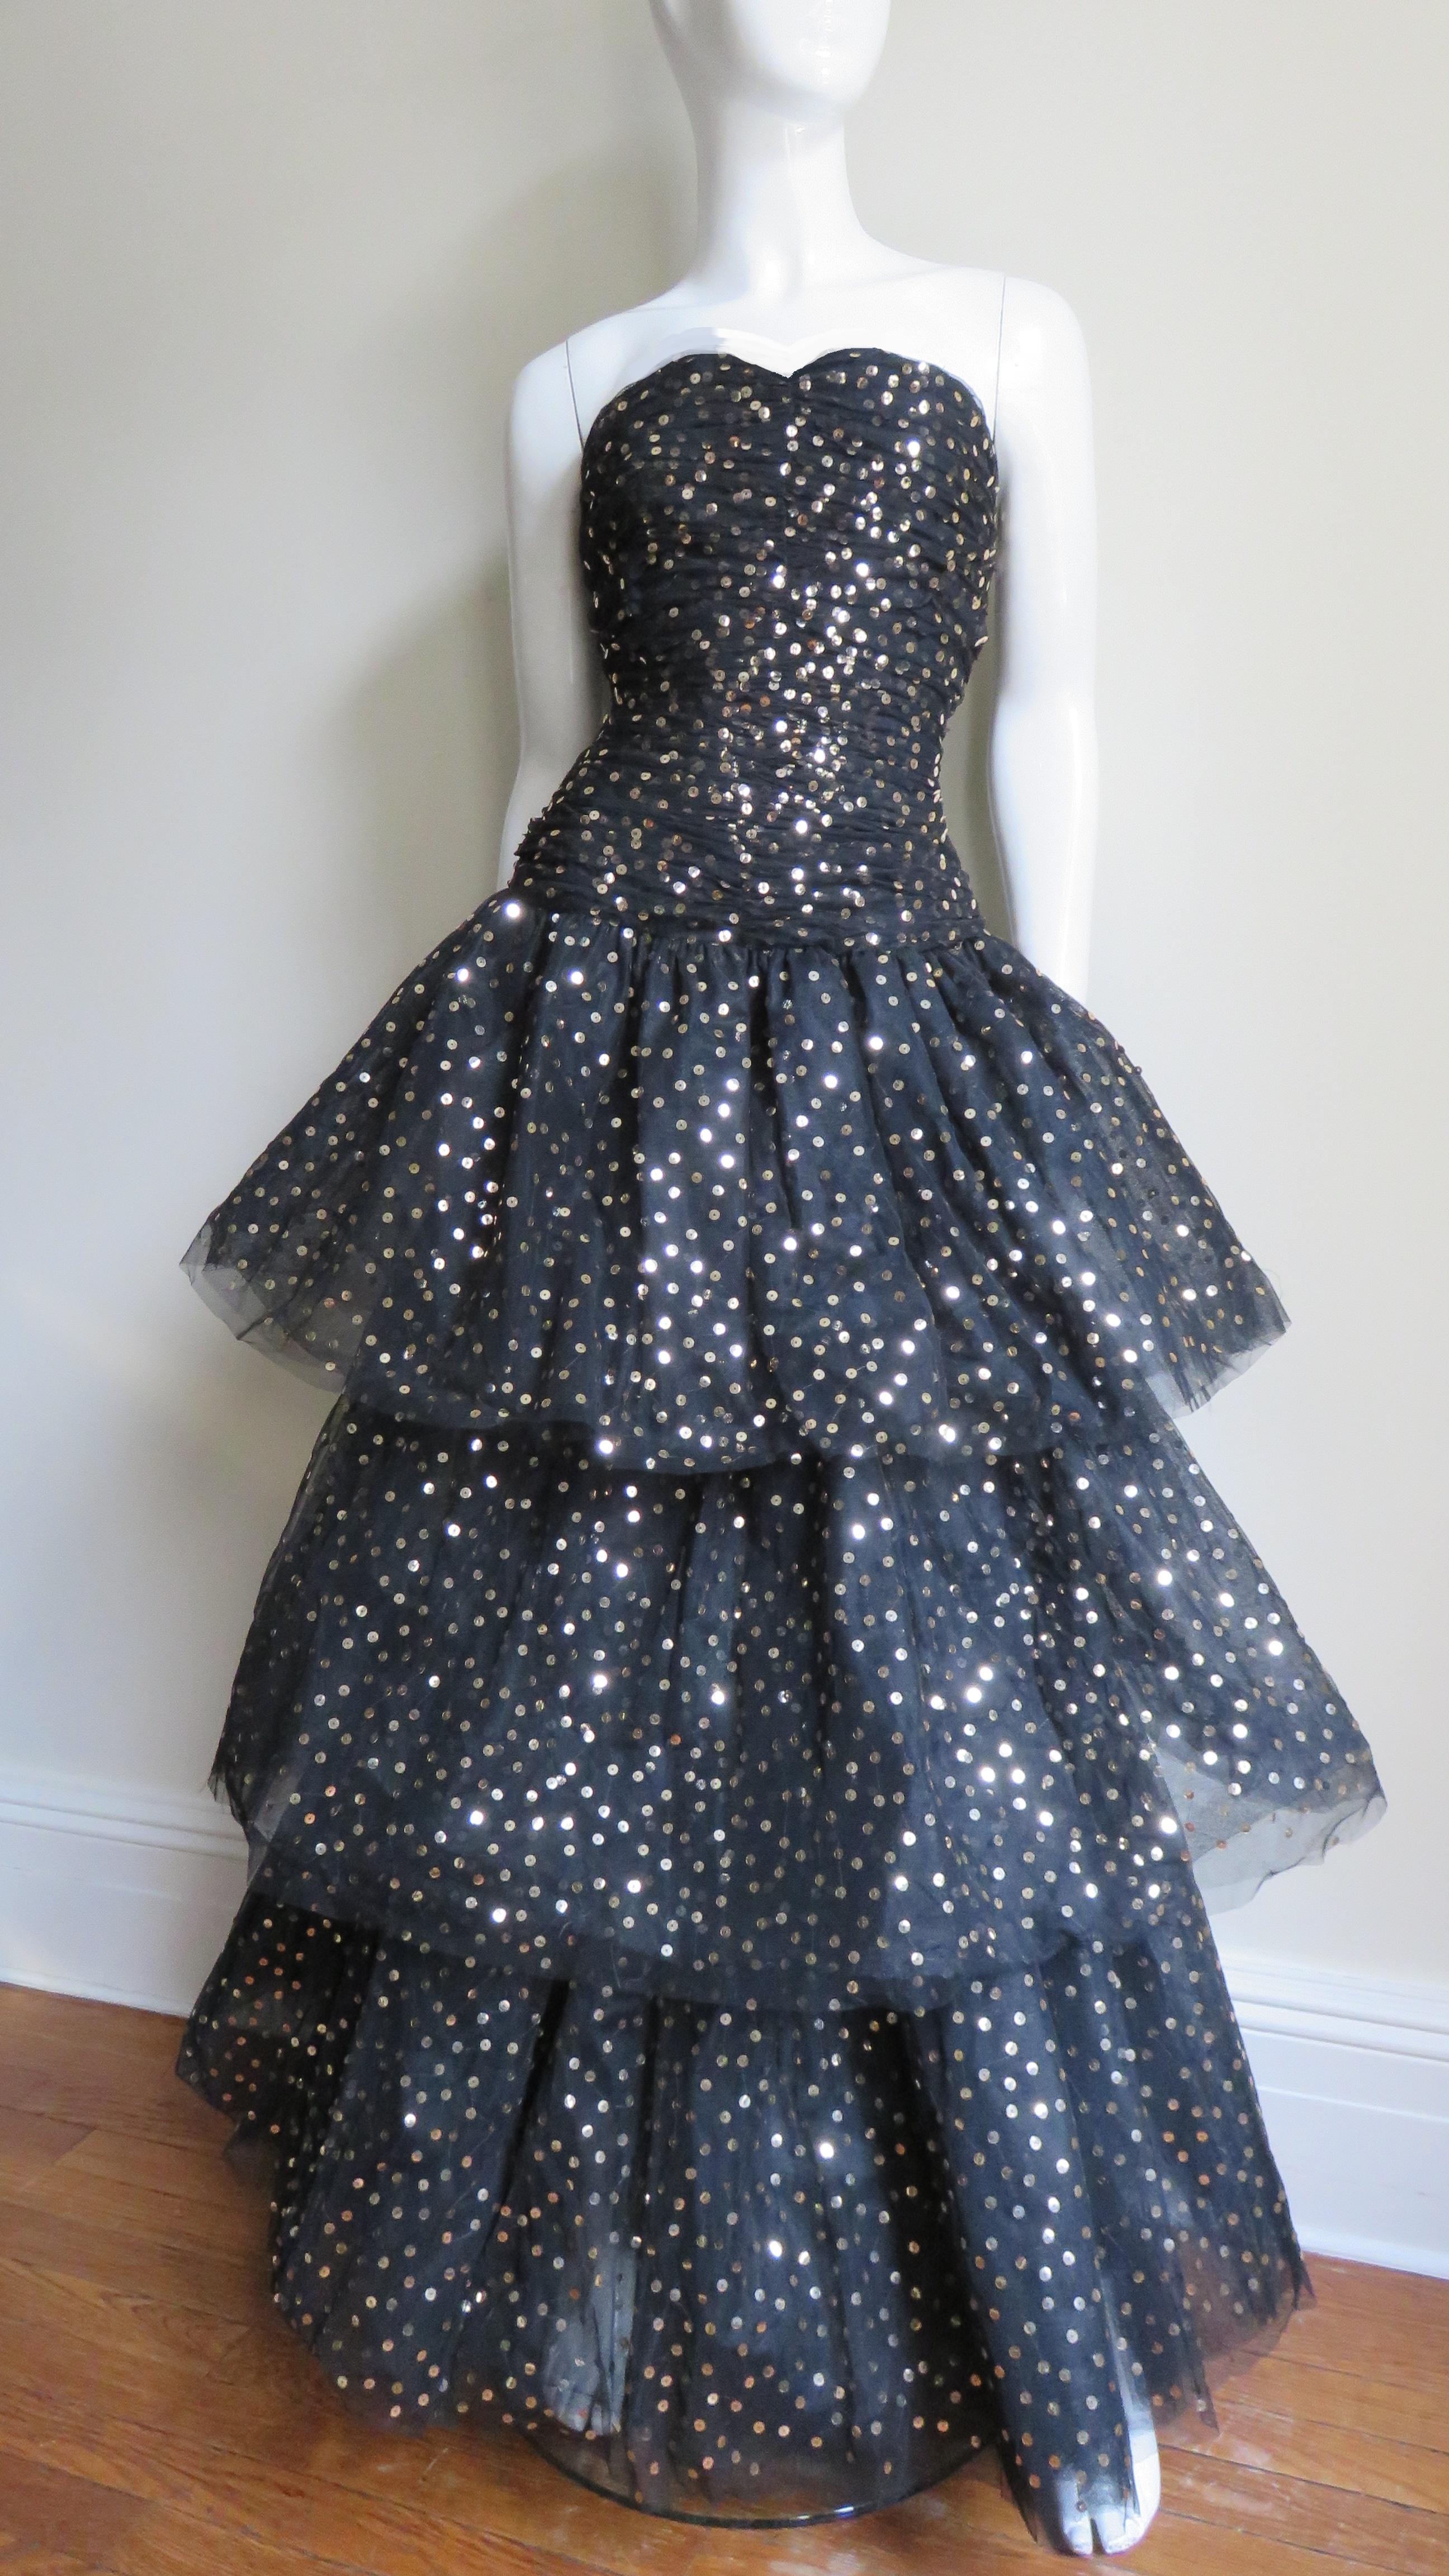 A sunning gown from Arnold Scassi consisting of layers of sequin dotted black tulle. The bodice is boned, horizontally ruched and has a drop waist. The skirt is layered in three lengths creating a full skirt and has additional layers of tulle